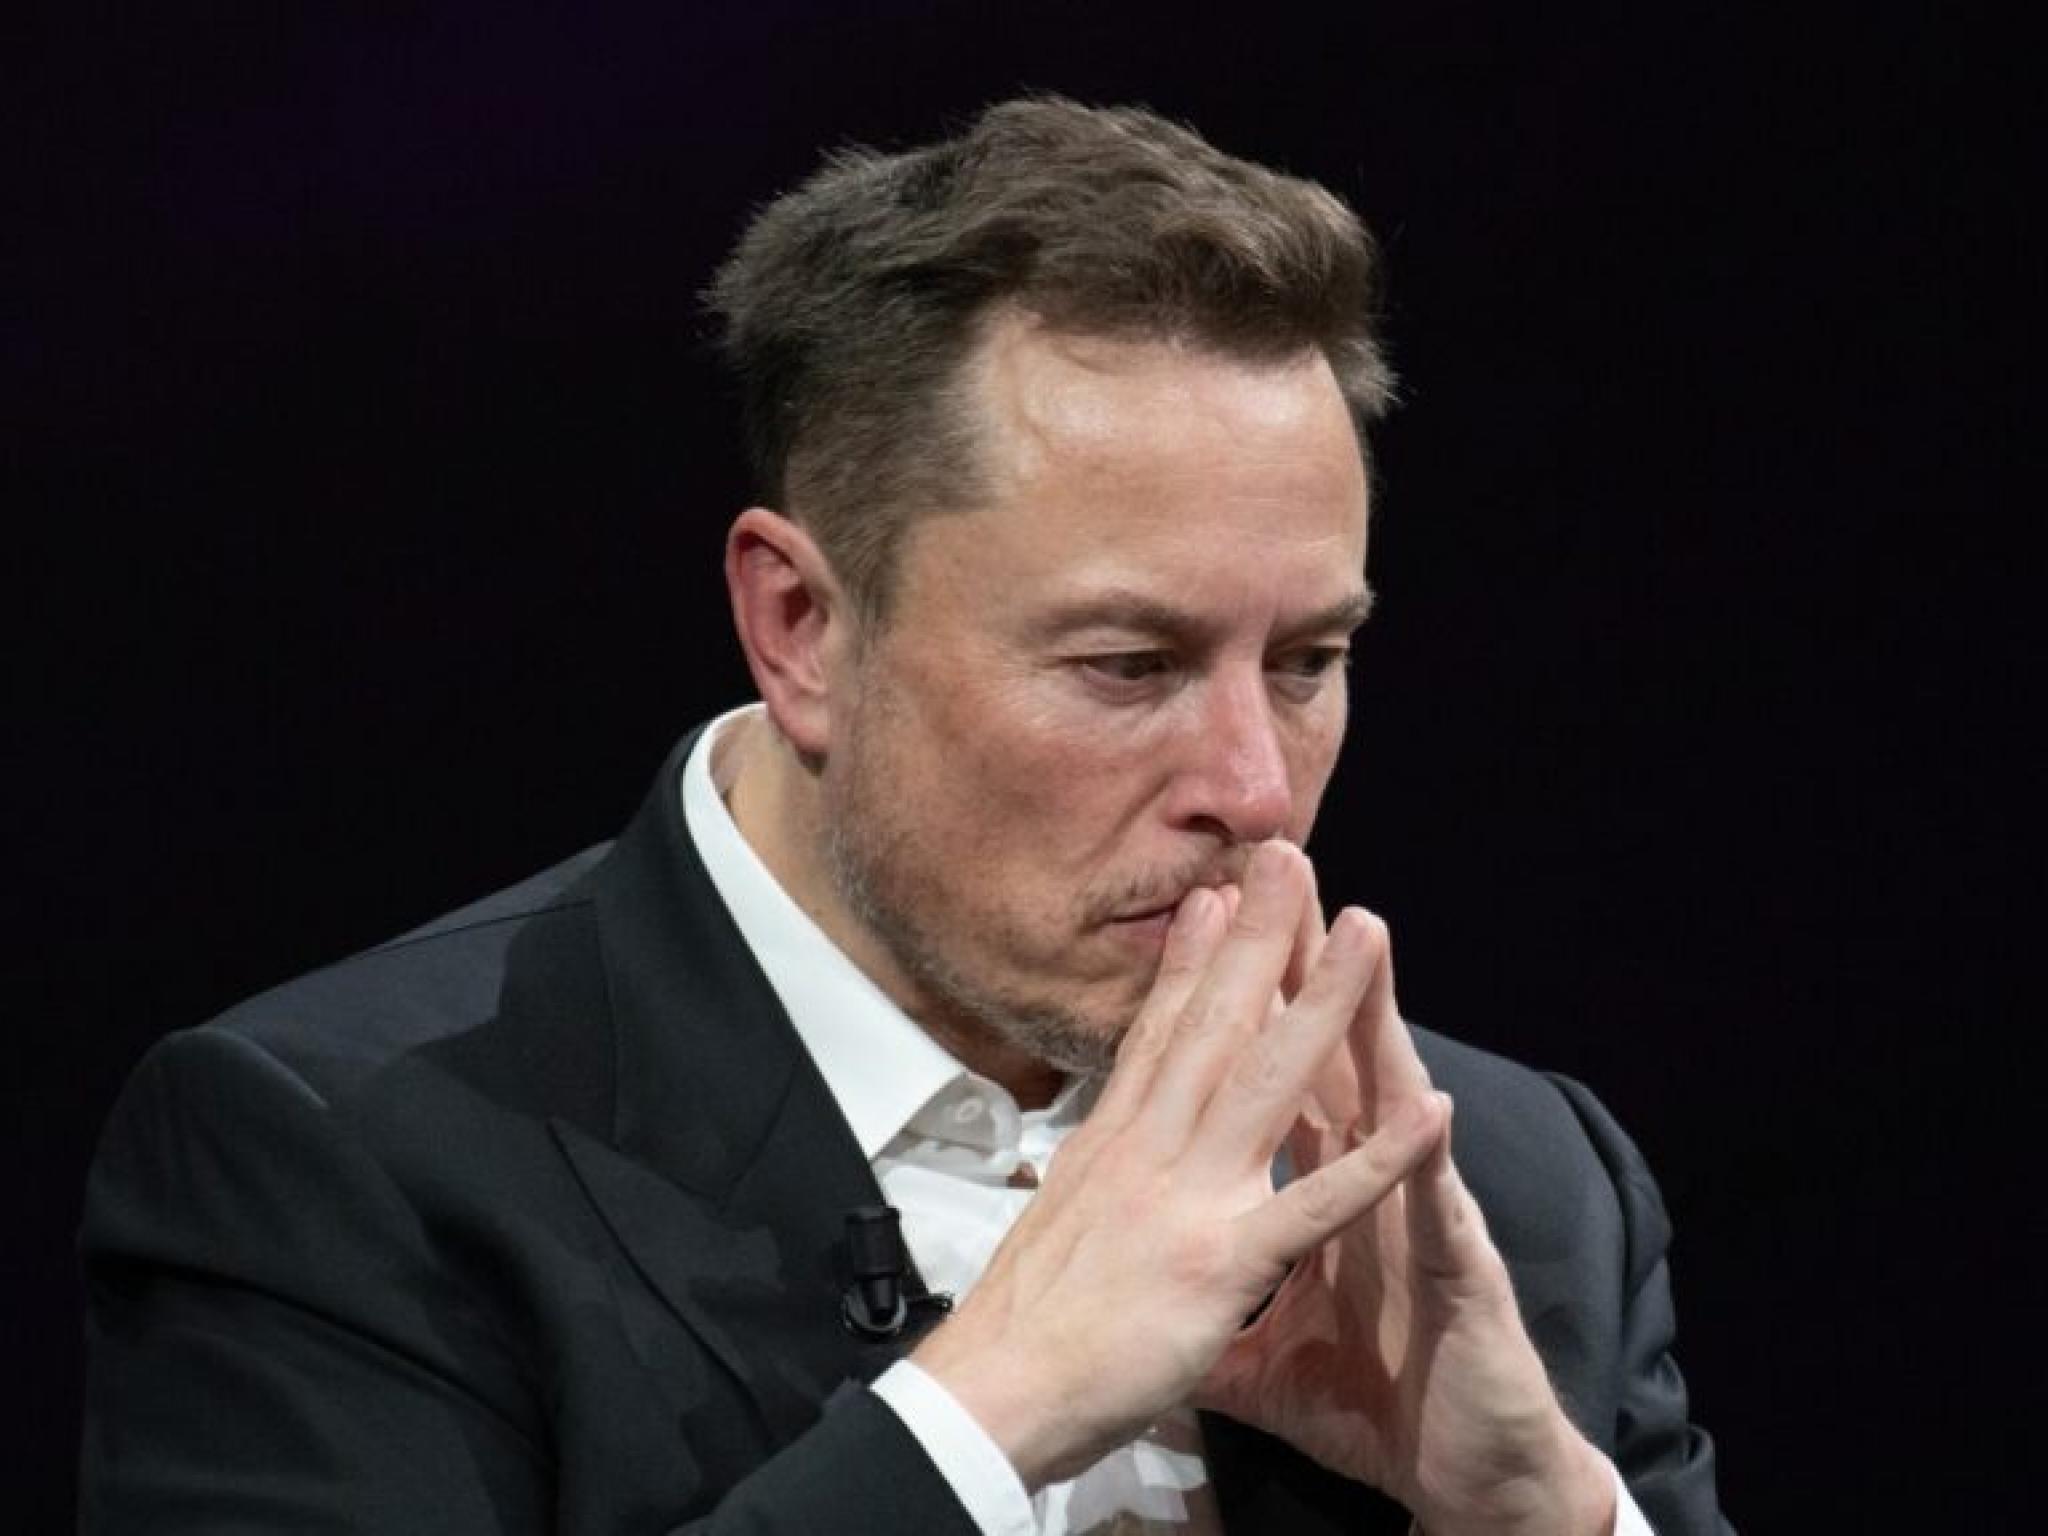  elon-musk-jamie-dimon-ending-years-long-feud-report-says-billionaires-attendance-at-jpmorgans-march-tech-conference-paved-the-way-for-truce 